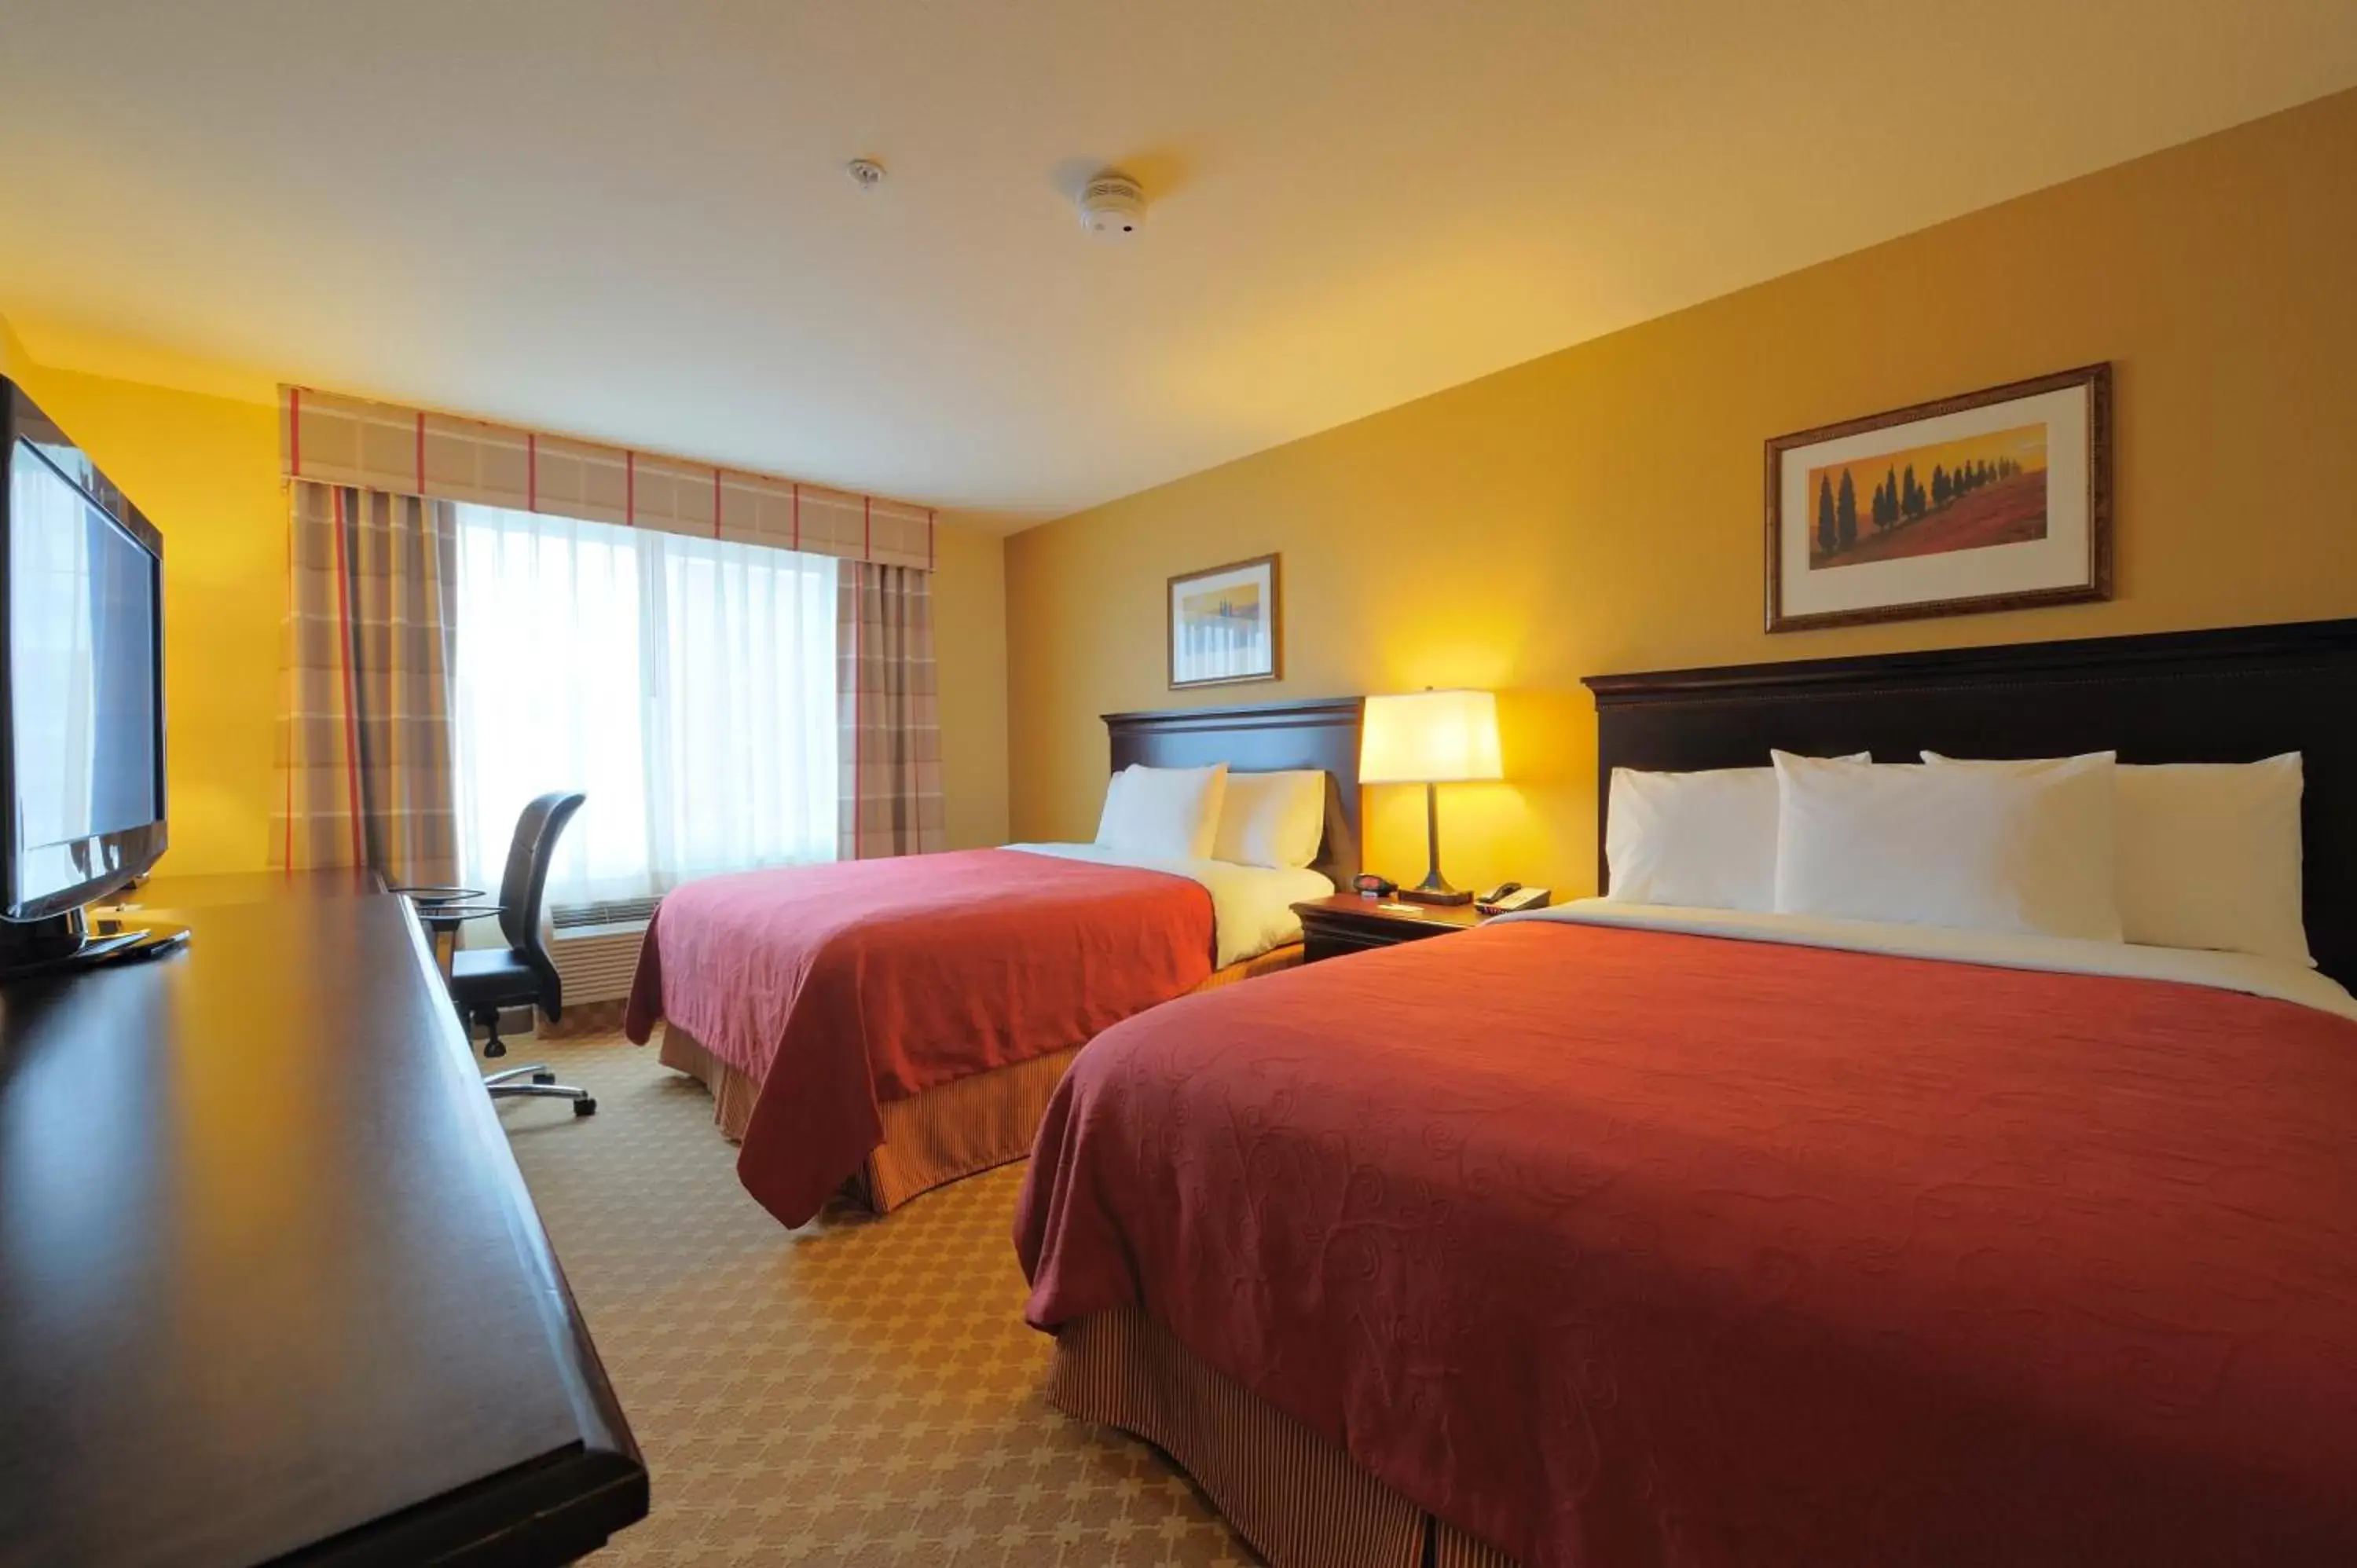 Queen Room with Two Queen Beds in Country Inn & Suites by Radisson, Washington at Meadowlands, PA